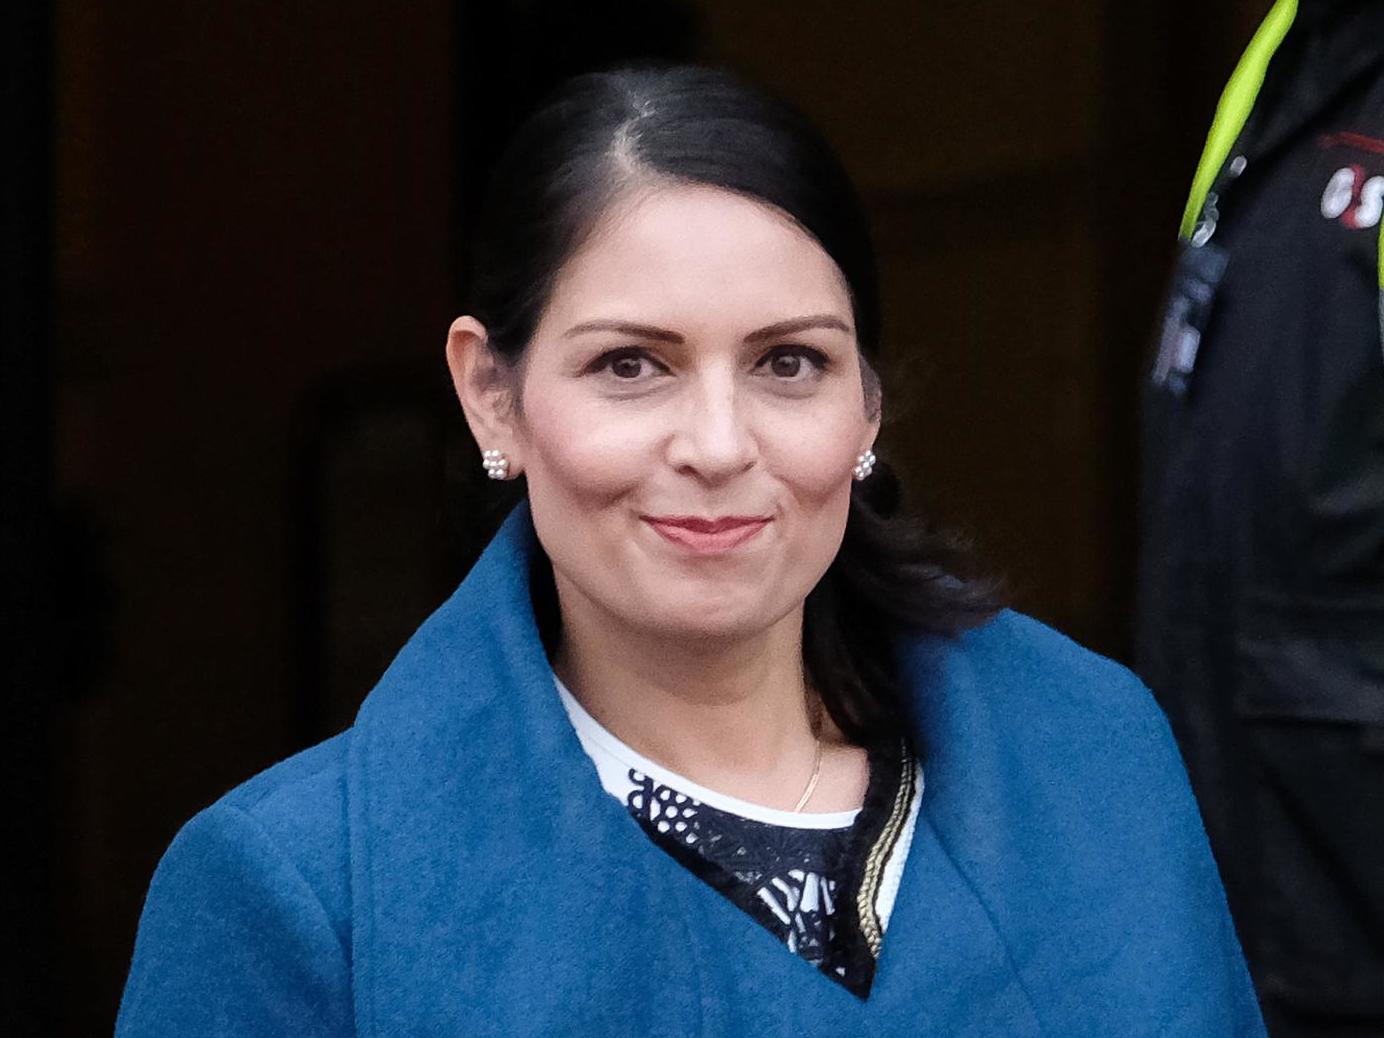 Brexit: Industry bodies representing hundreds of thousands of businesses call on Priti Patel to lower minimum wage for migrant workers